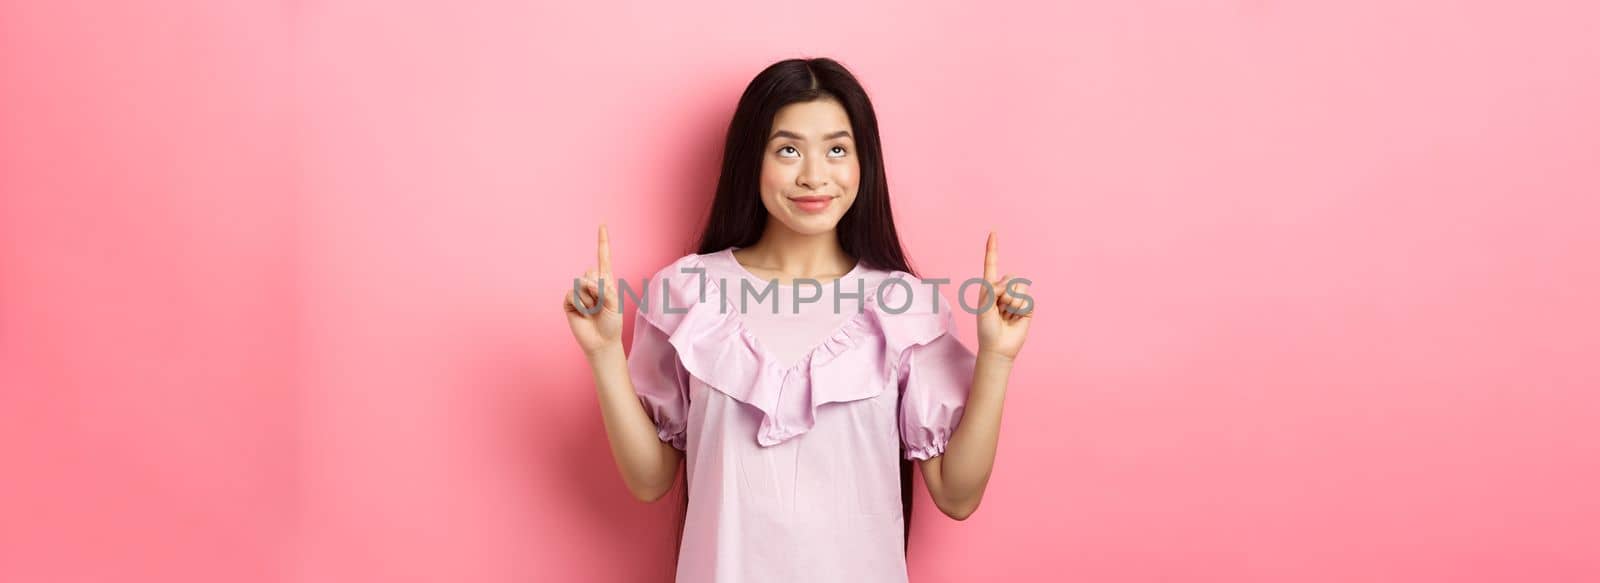 Beautiful smiling asian teen girl pointing fingers up, looking at advertisement with happy face, standing on pink background.